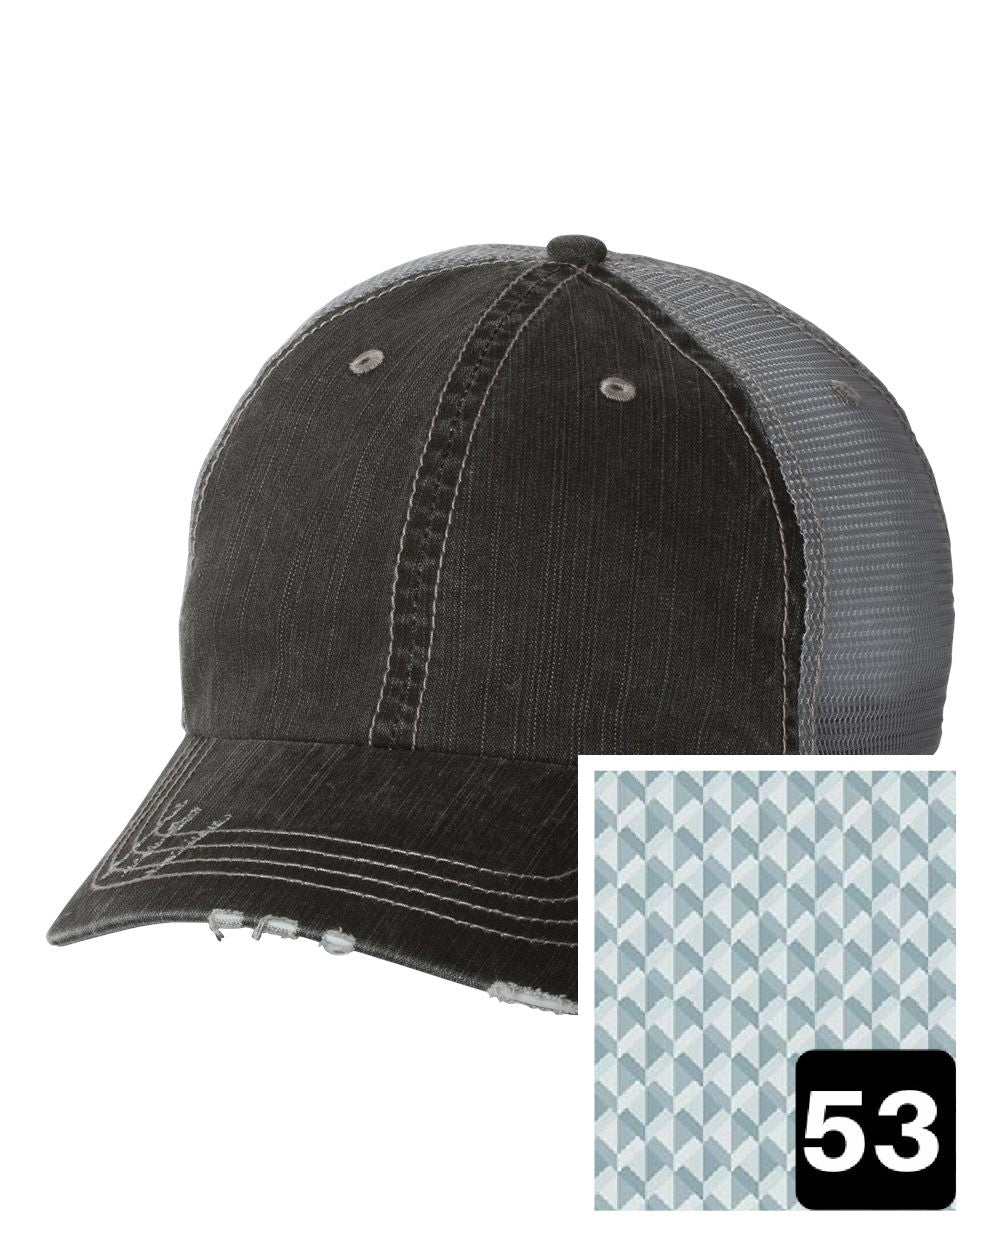 gray distressed trucker hat with multi-color stripe fabric state of Florida